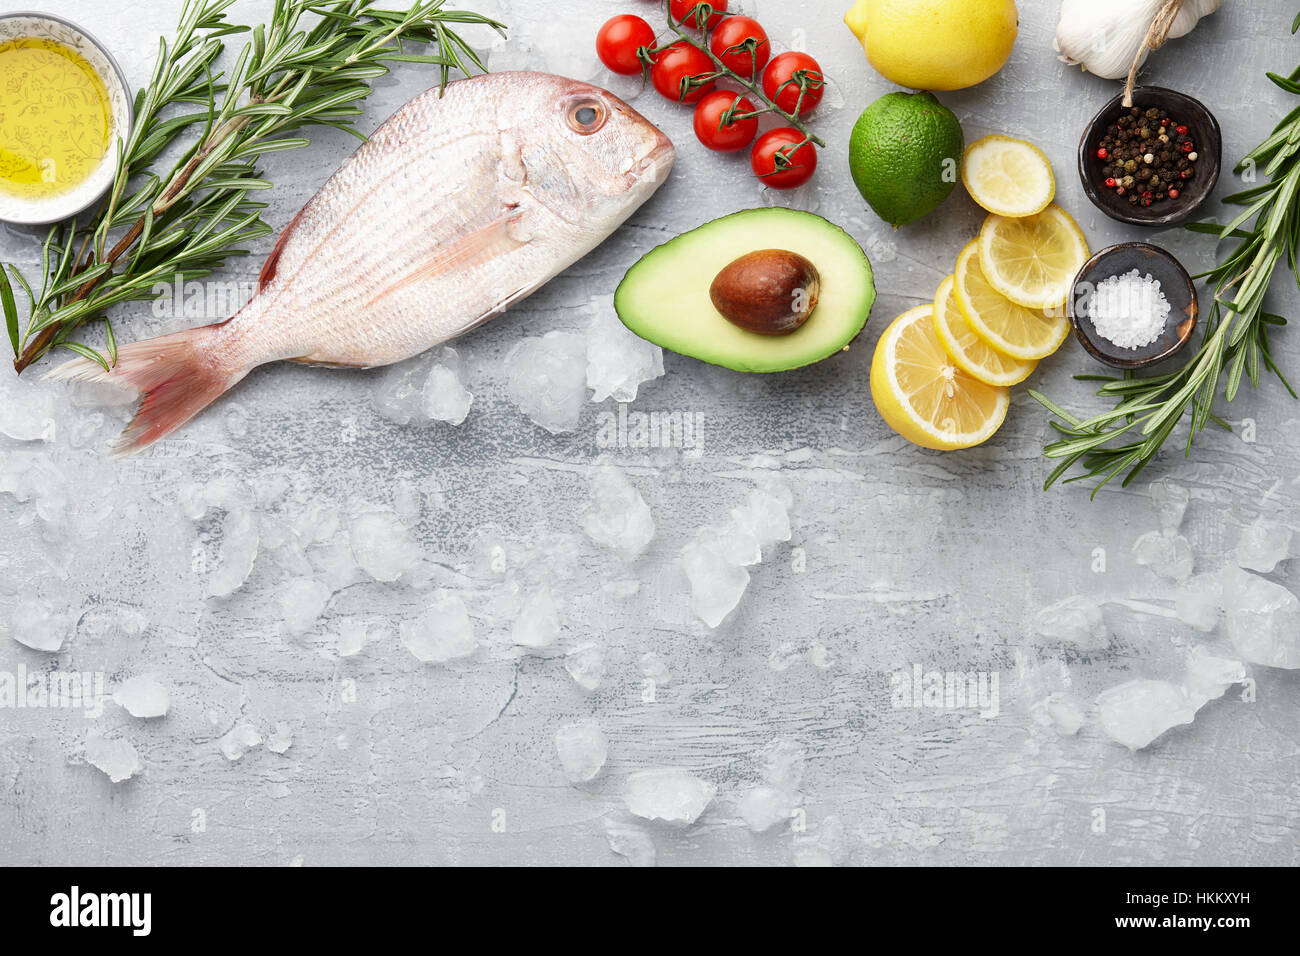 Fish cooking: fresh red Japanese seabream, lemon slices, avocado fruit, chili pepper, cherry tomatoes, olive oil, rosemary and spices on gray stone ba Stock Photo